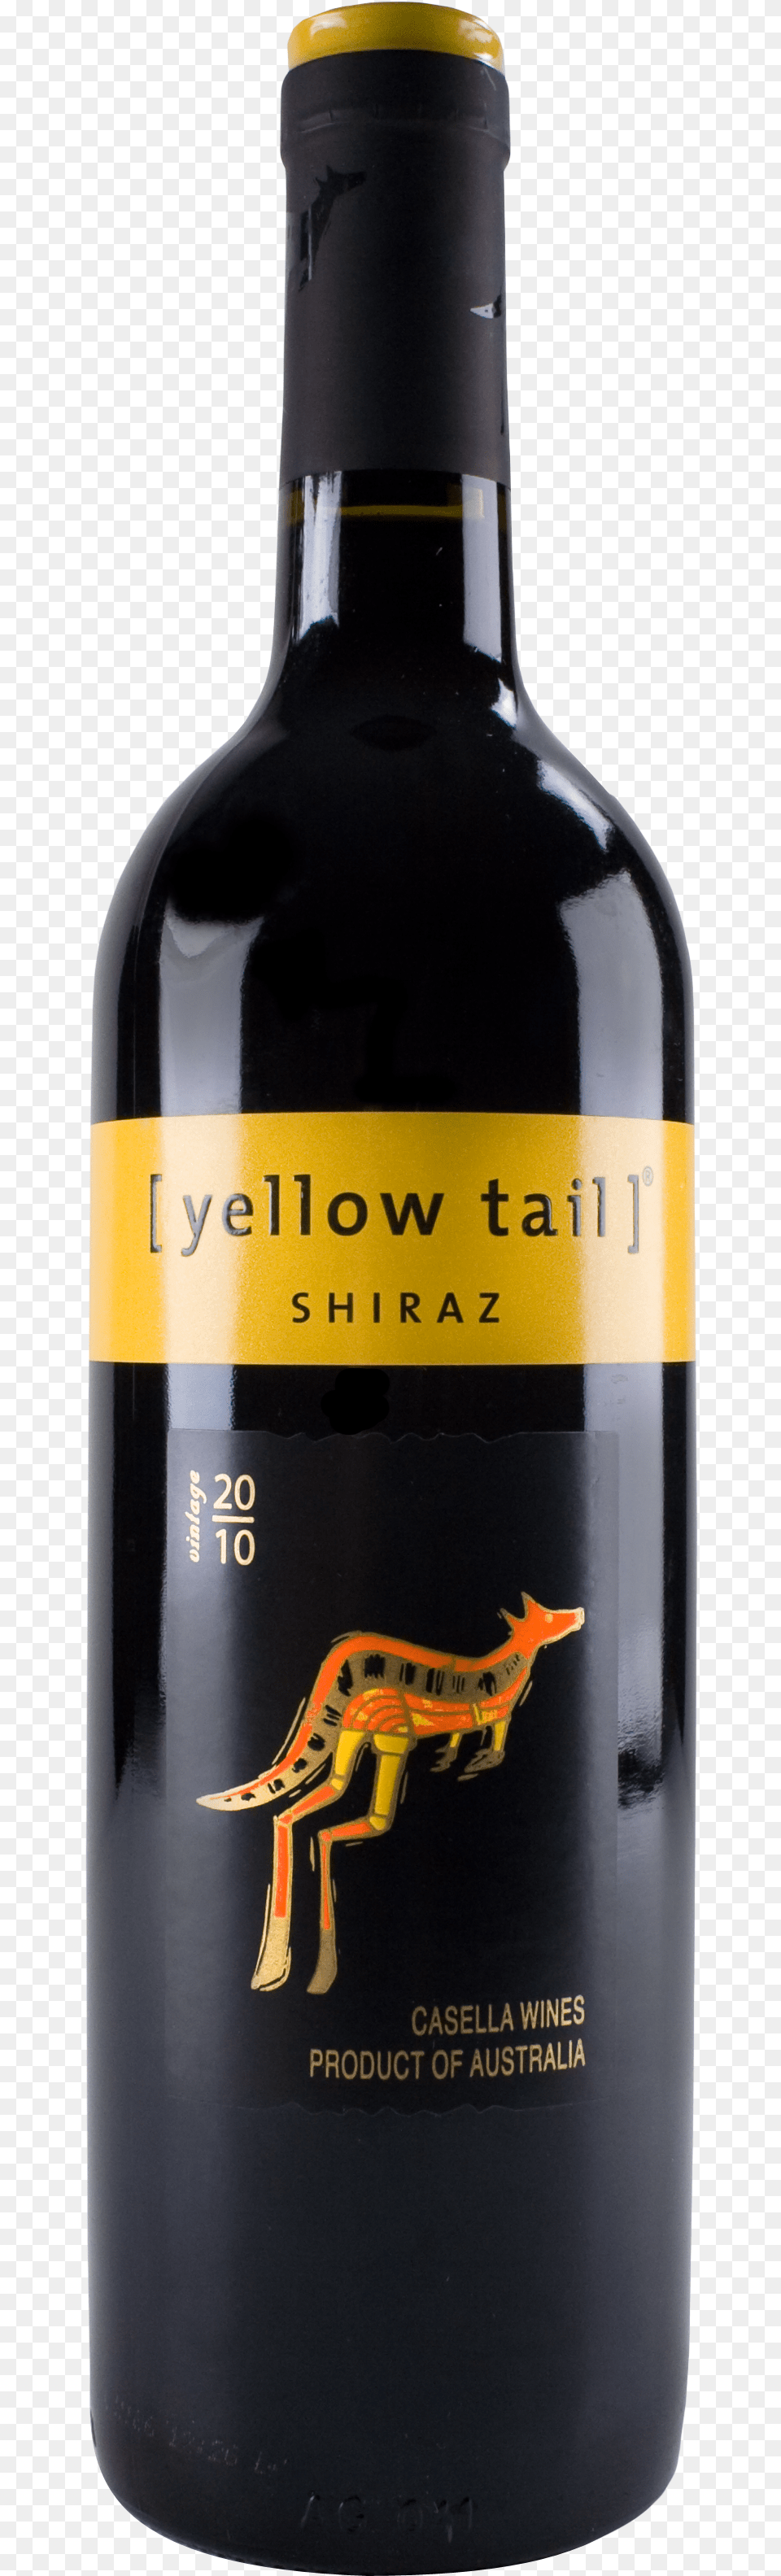 Iphone Label Thumb Yellow Tail Wine, Bottle, Alcohol, Beer, Beverage Png